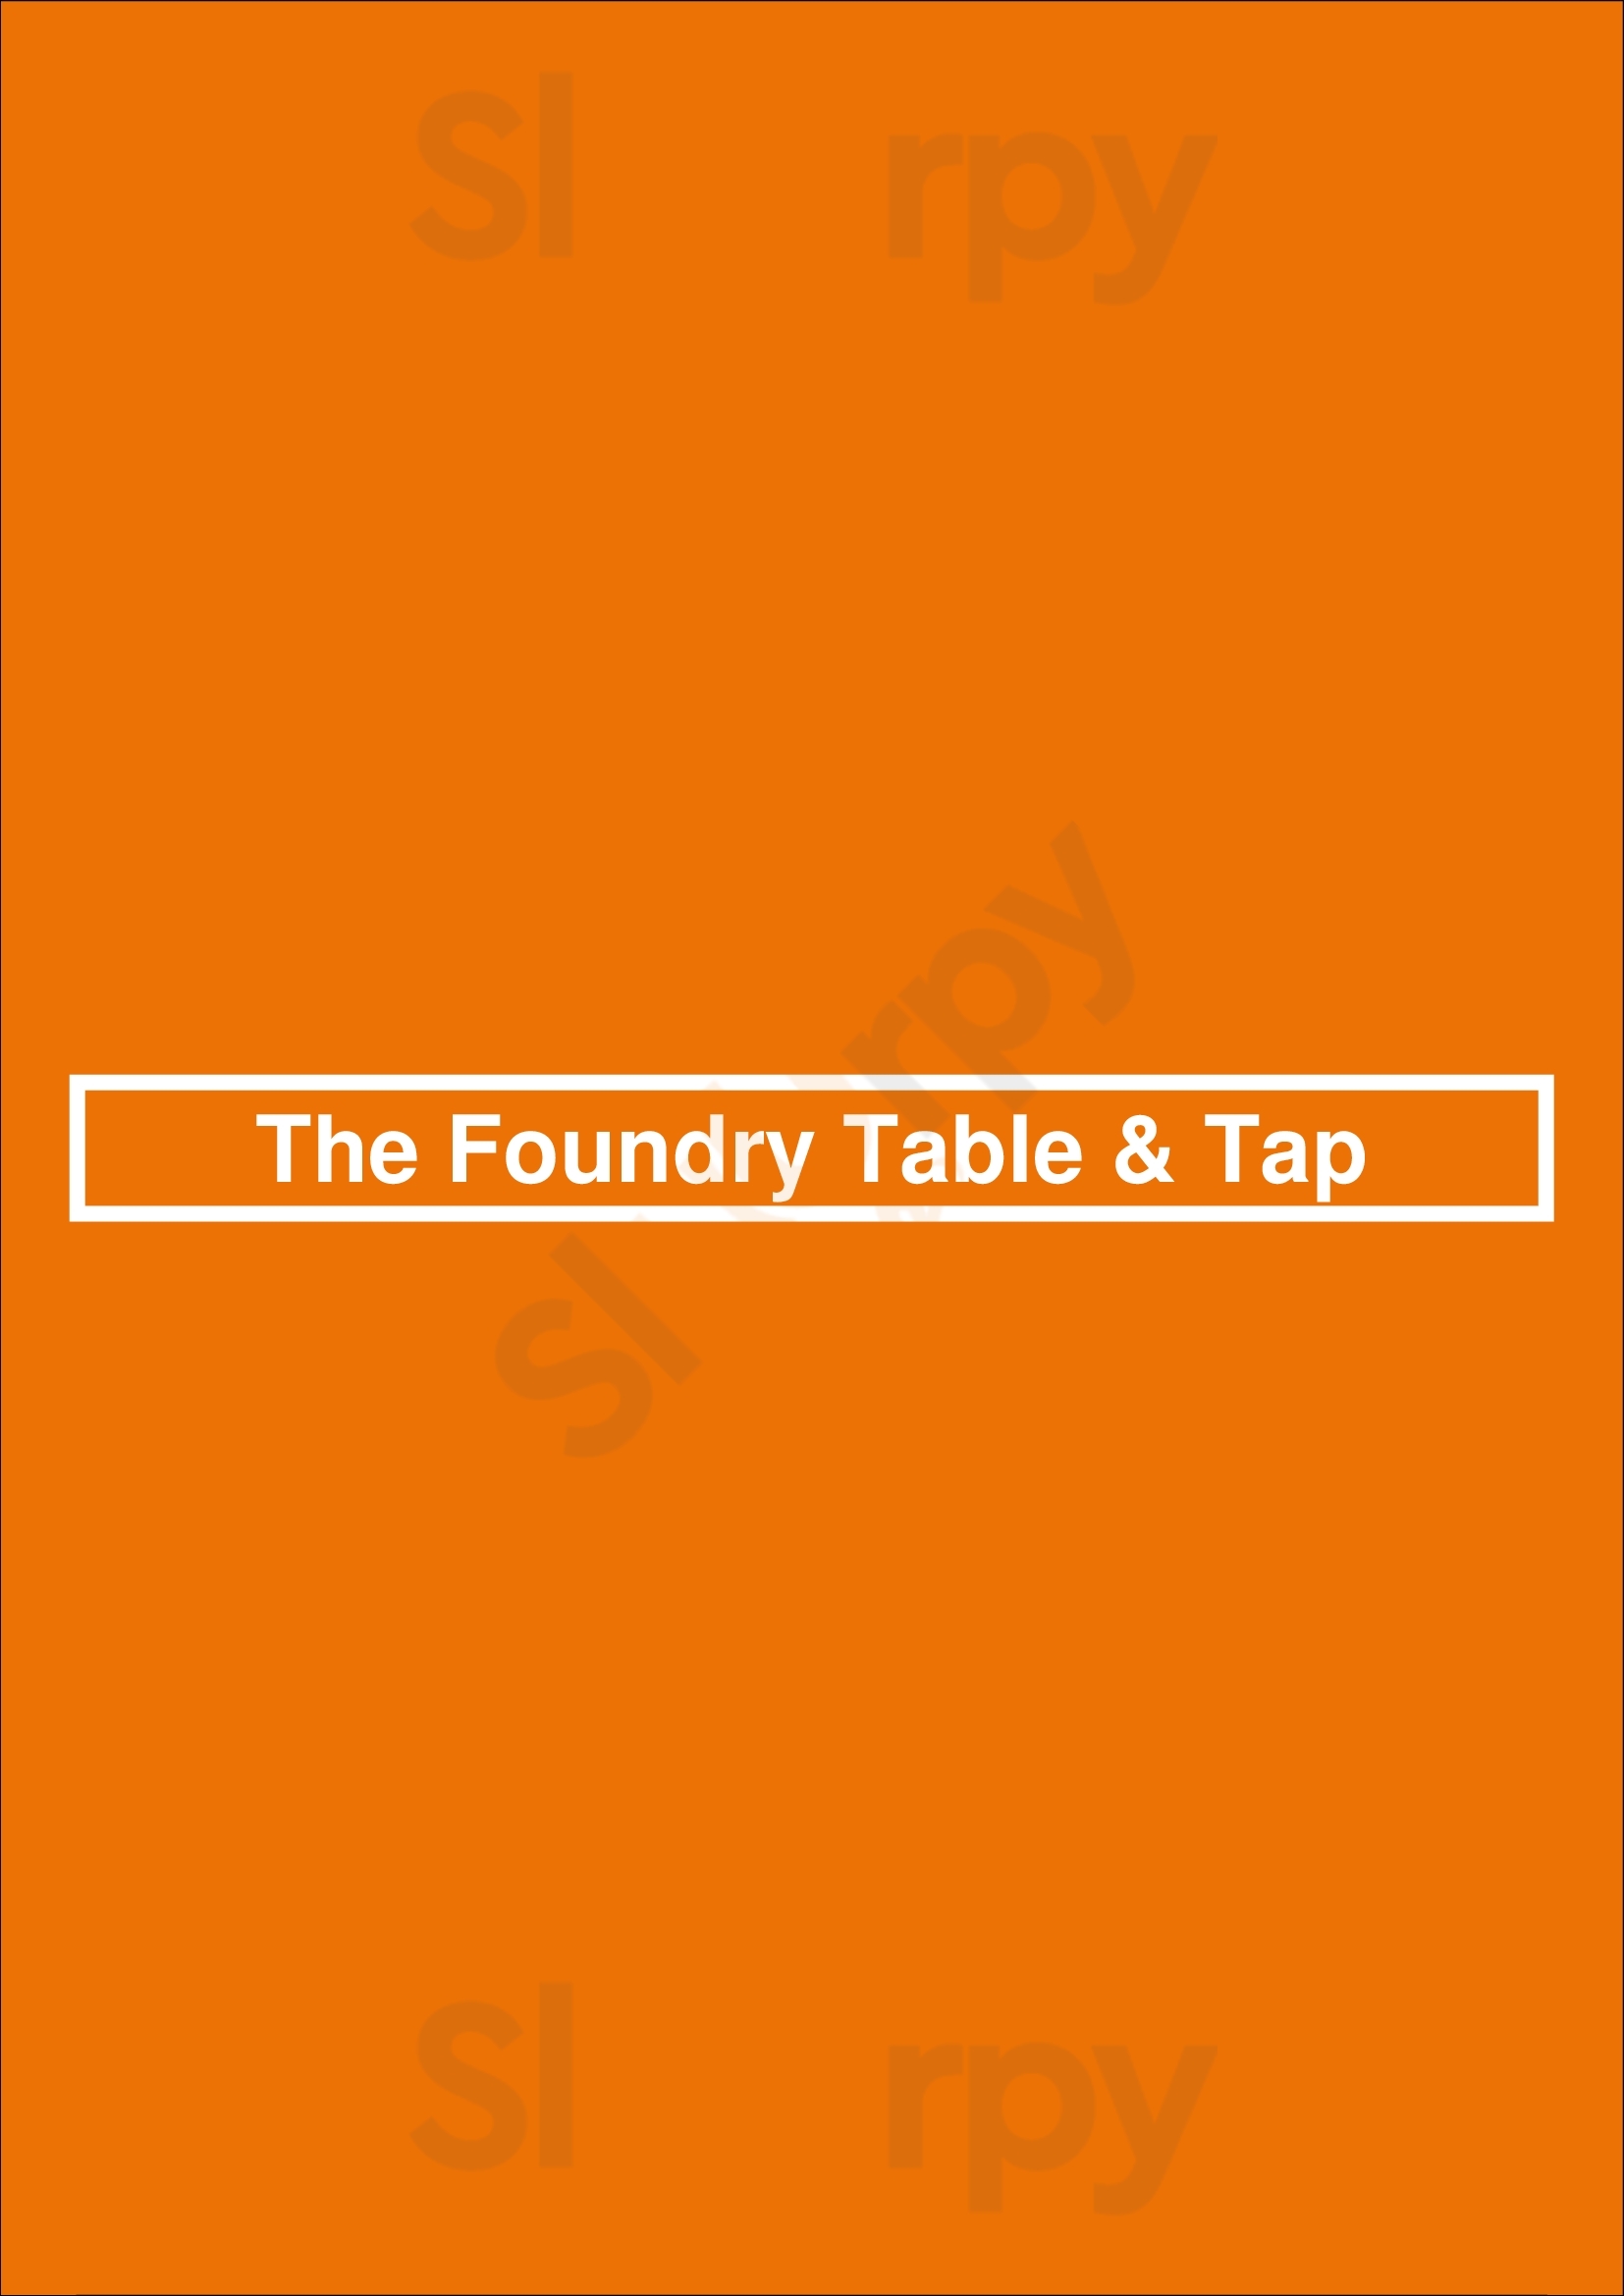 The Foundry Table & Tap Pittsburgh Menu - 1